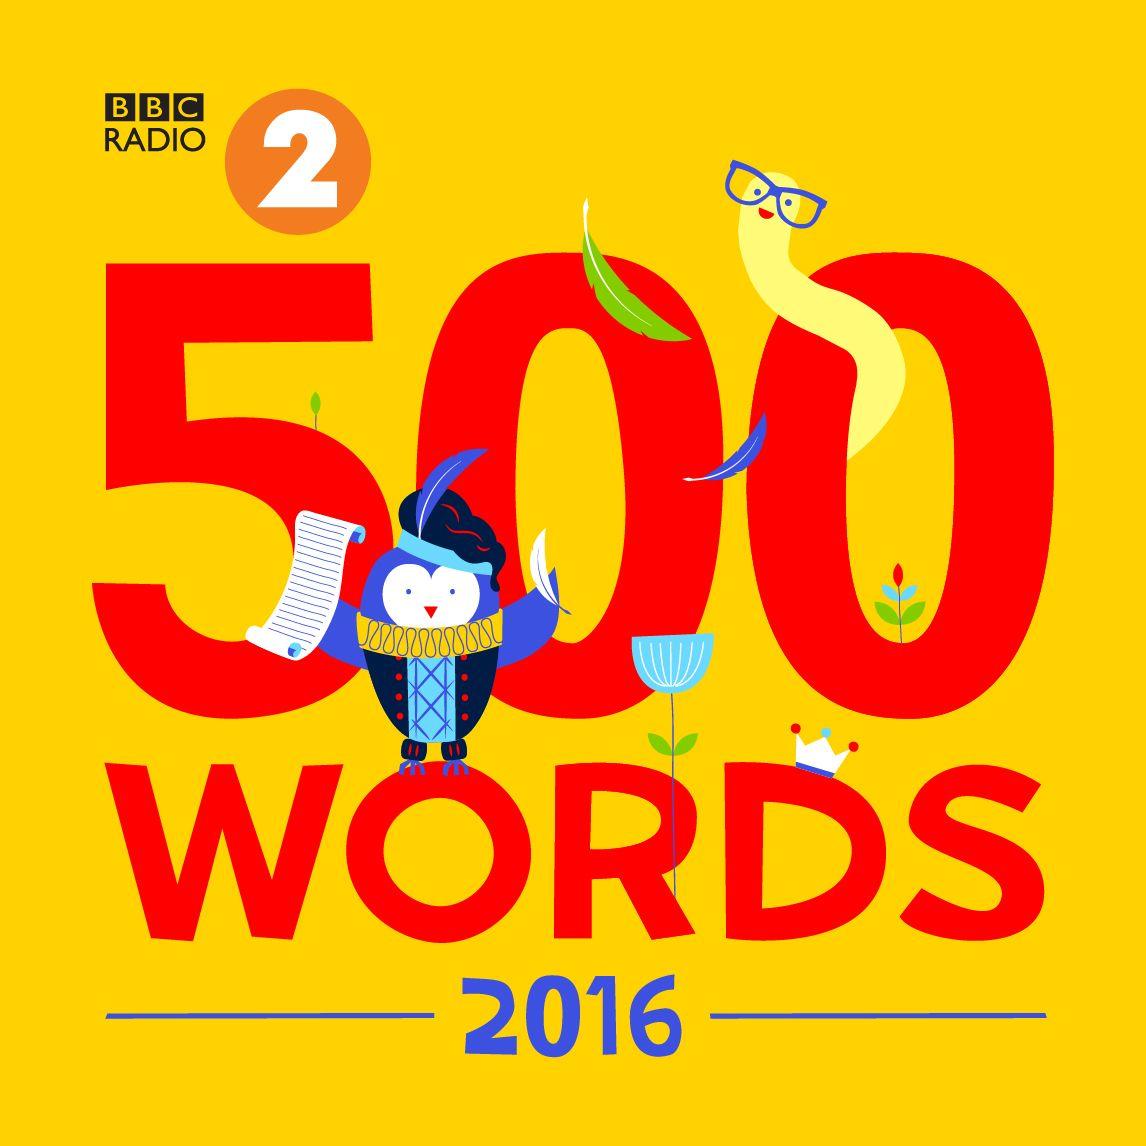 Red and Yellow Word Logo - BBC Radio 2's 500 WORDS competition launched with HRH The Duchess of ...